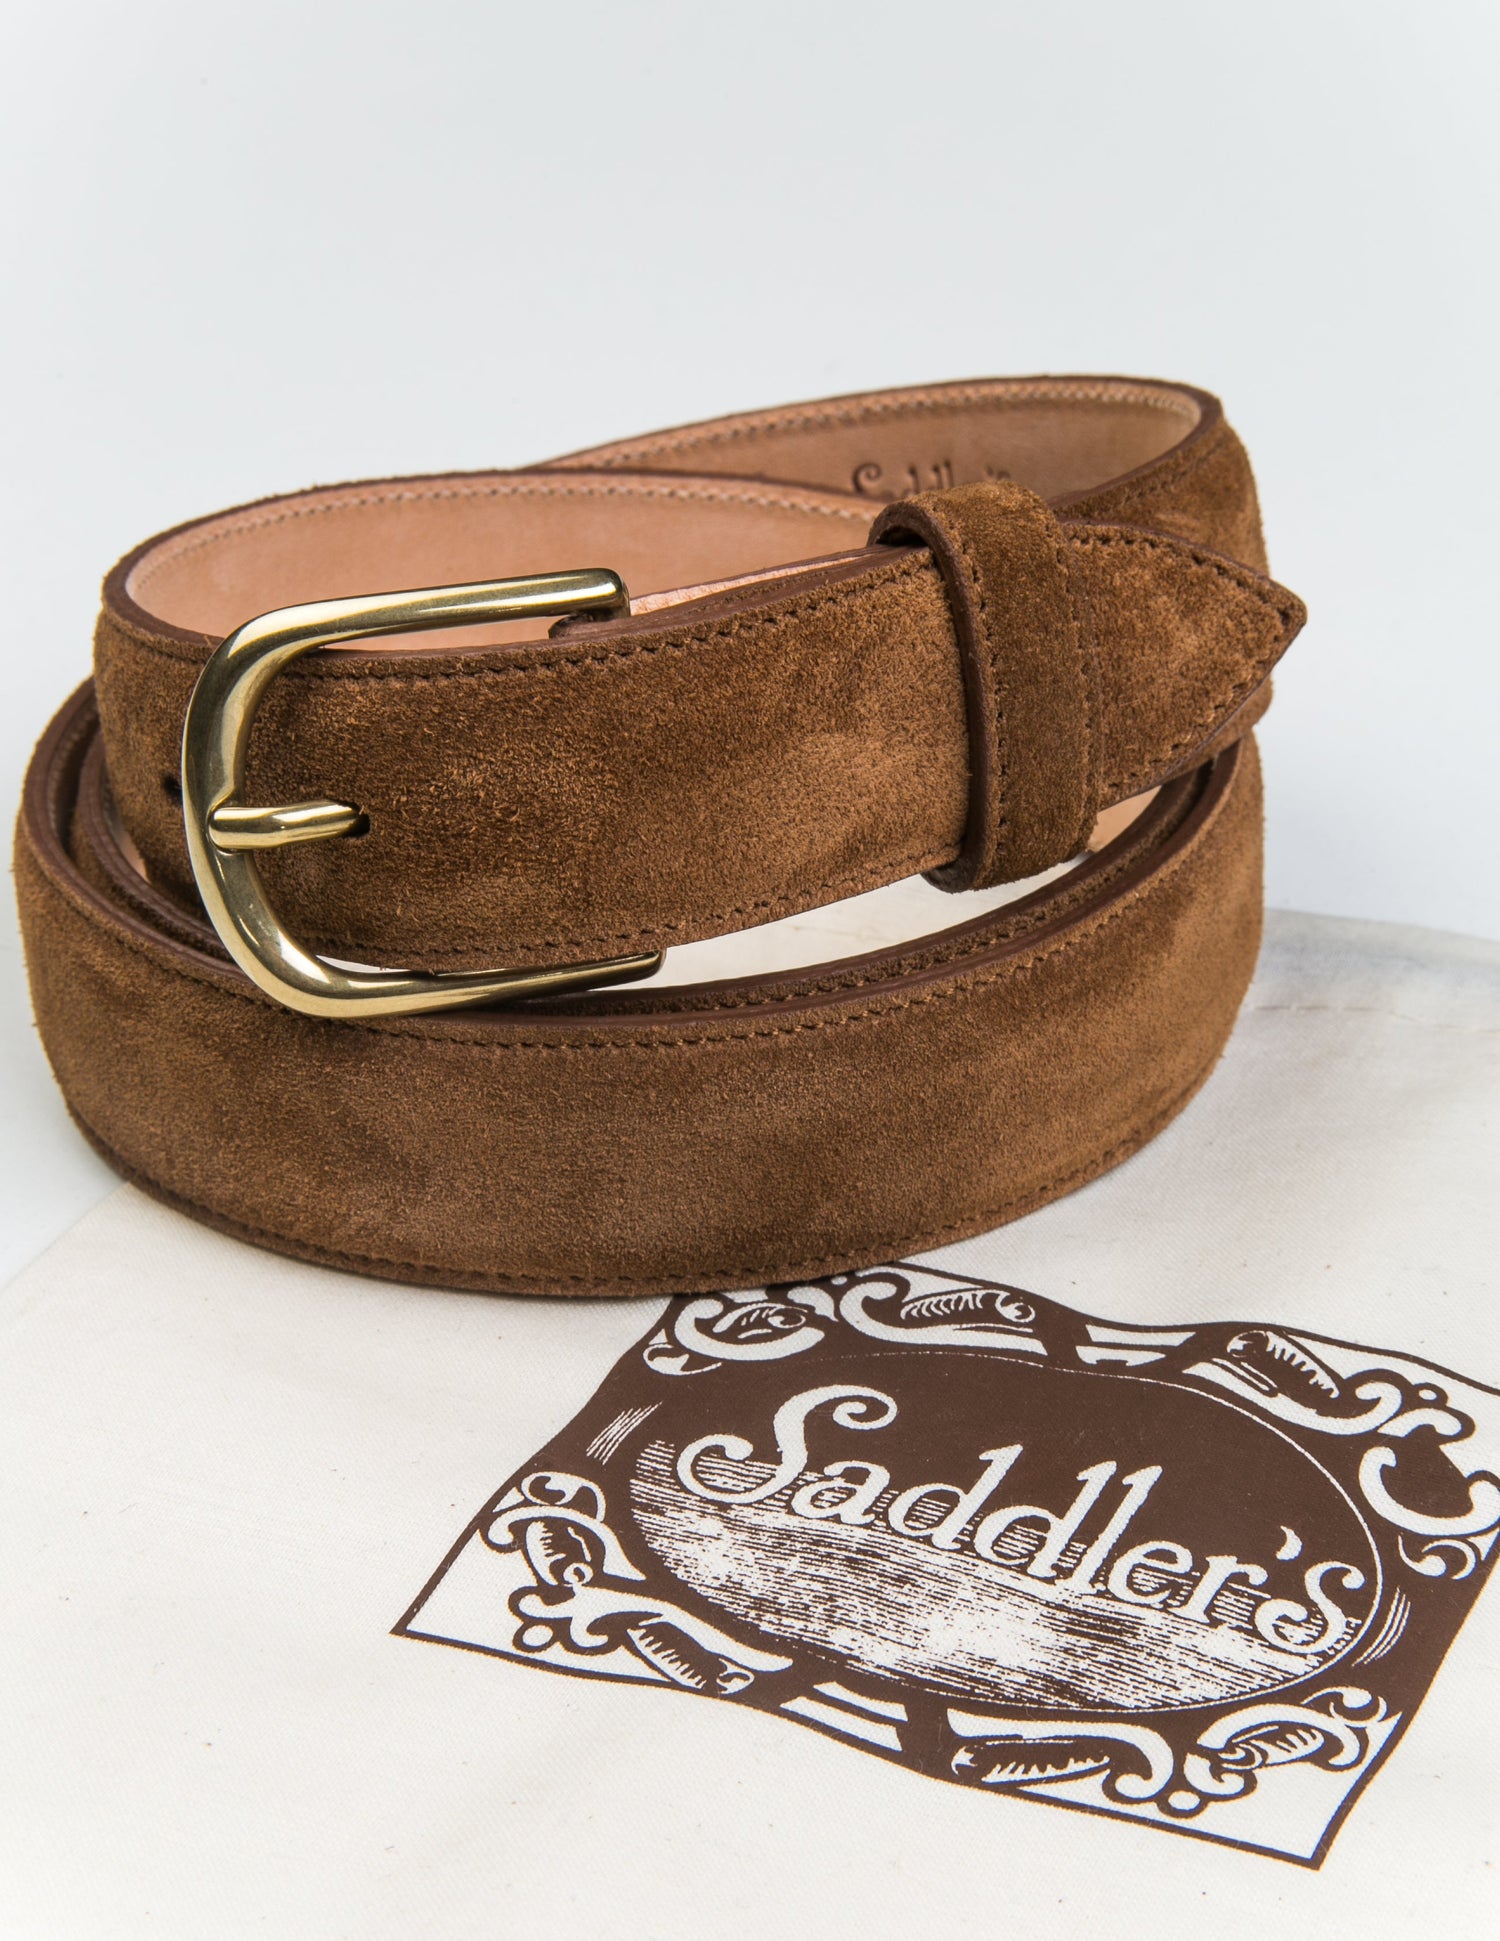 Brooklyn Tailors x Saddler's 30mm Belt in Suede Leather - Warm Brown coiled next to the fabric dust bag it is sold with. 